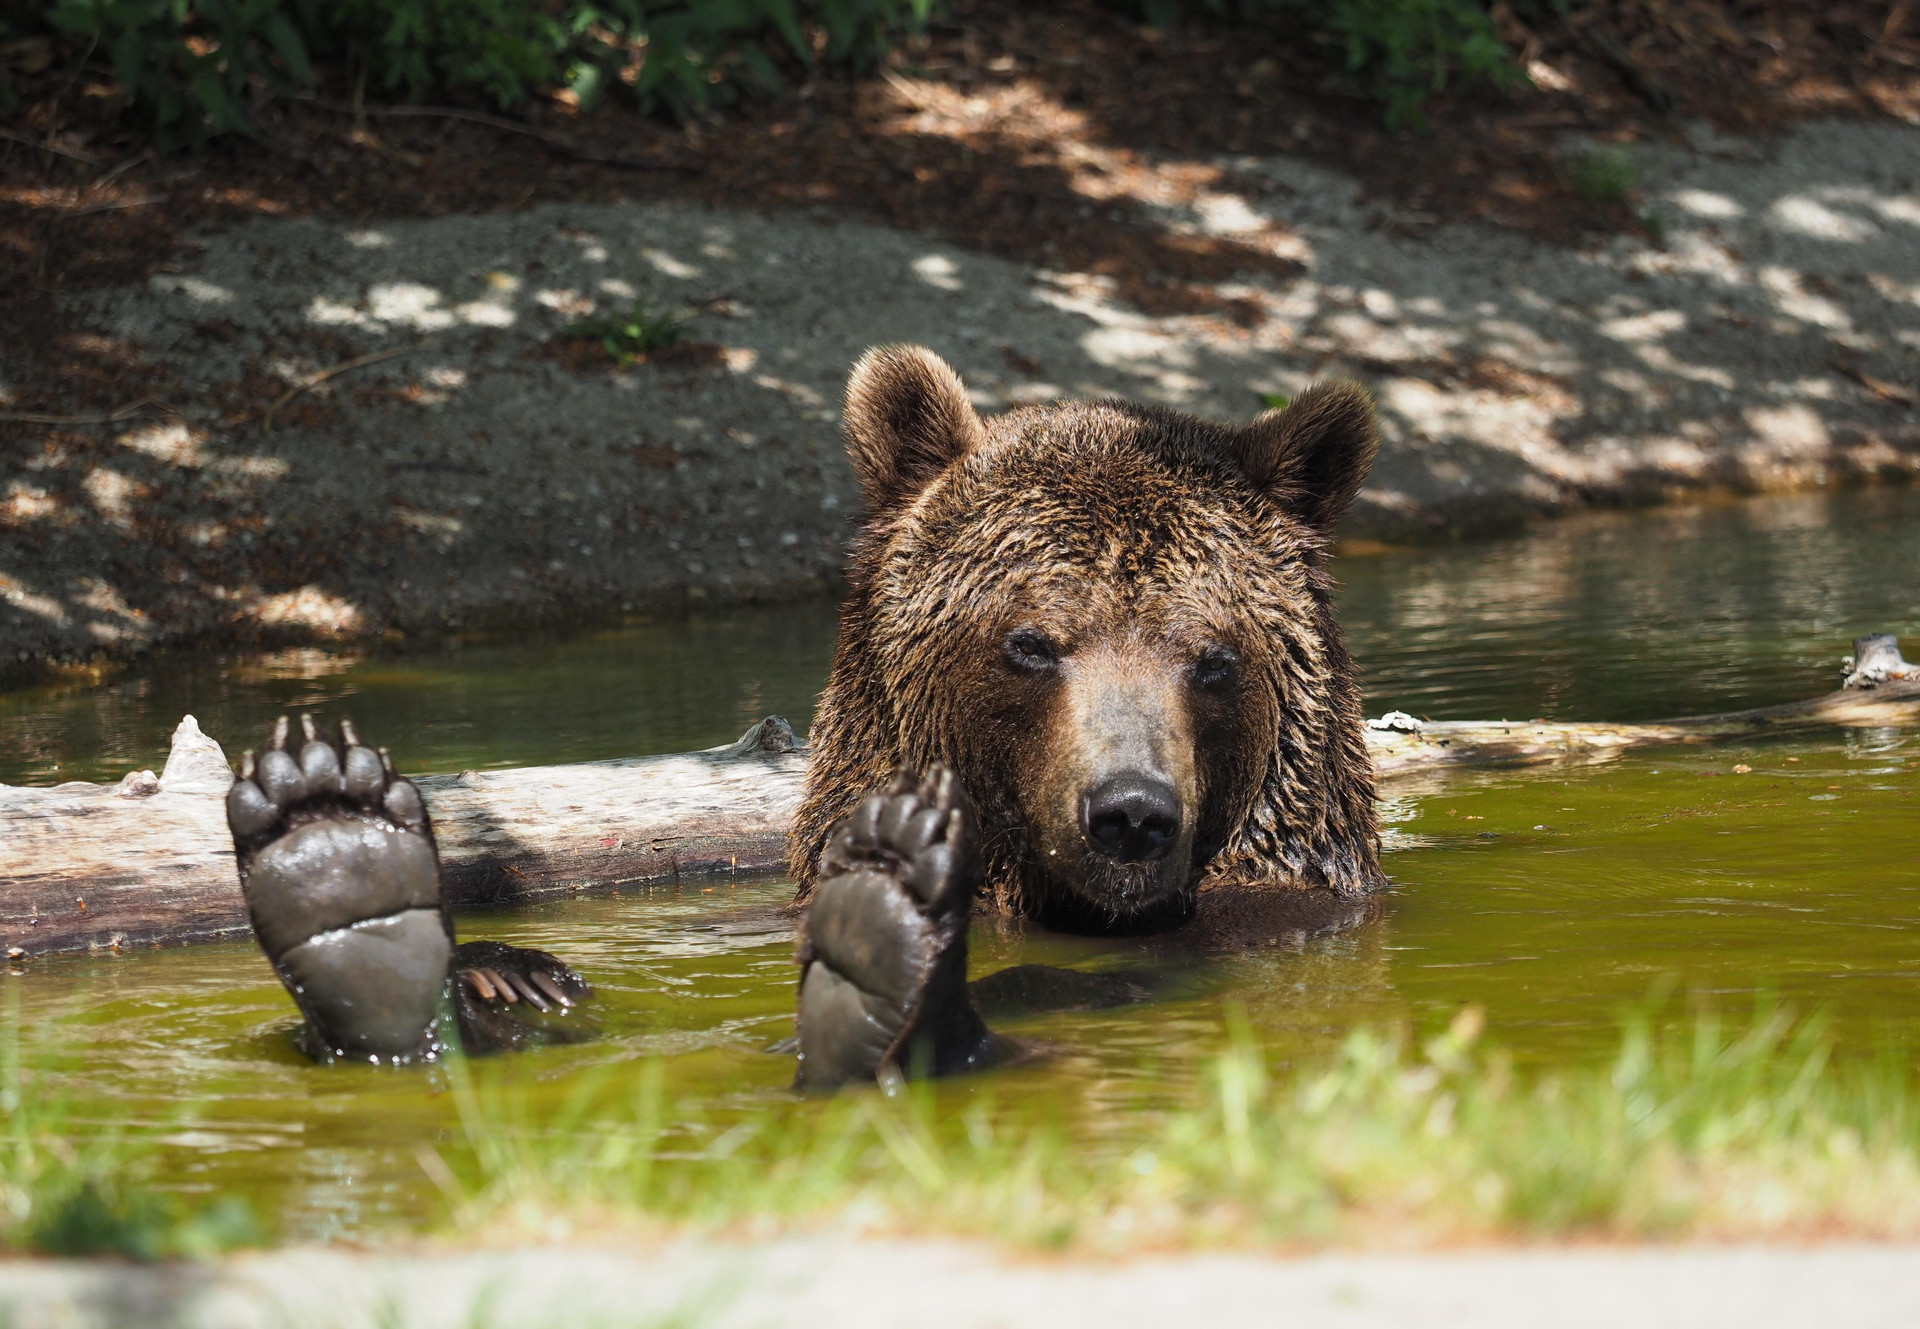 Bear Erich in his pool at BEAR SANCTUARY Arbesbach